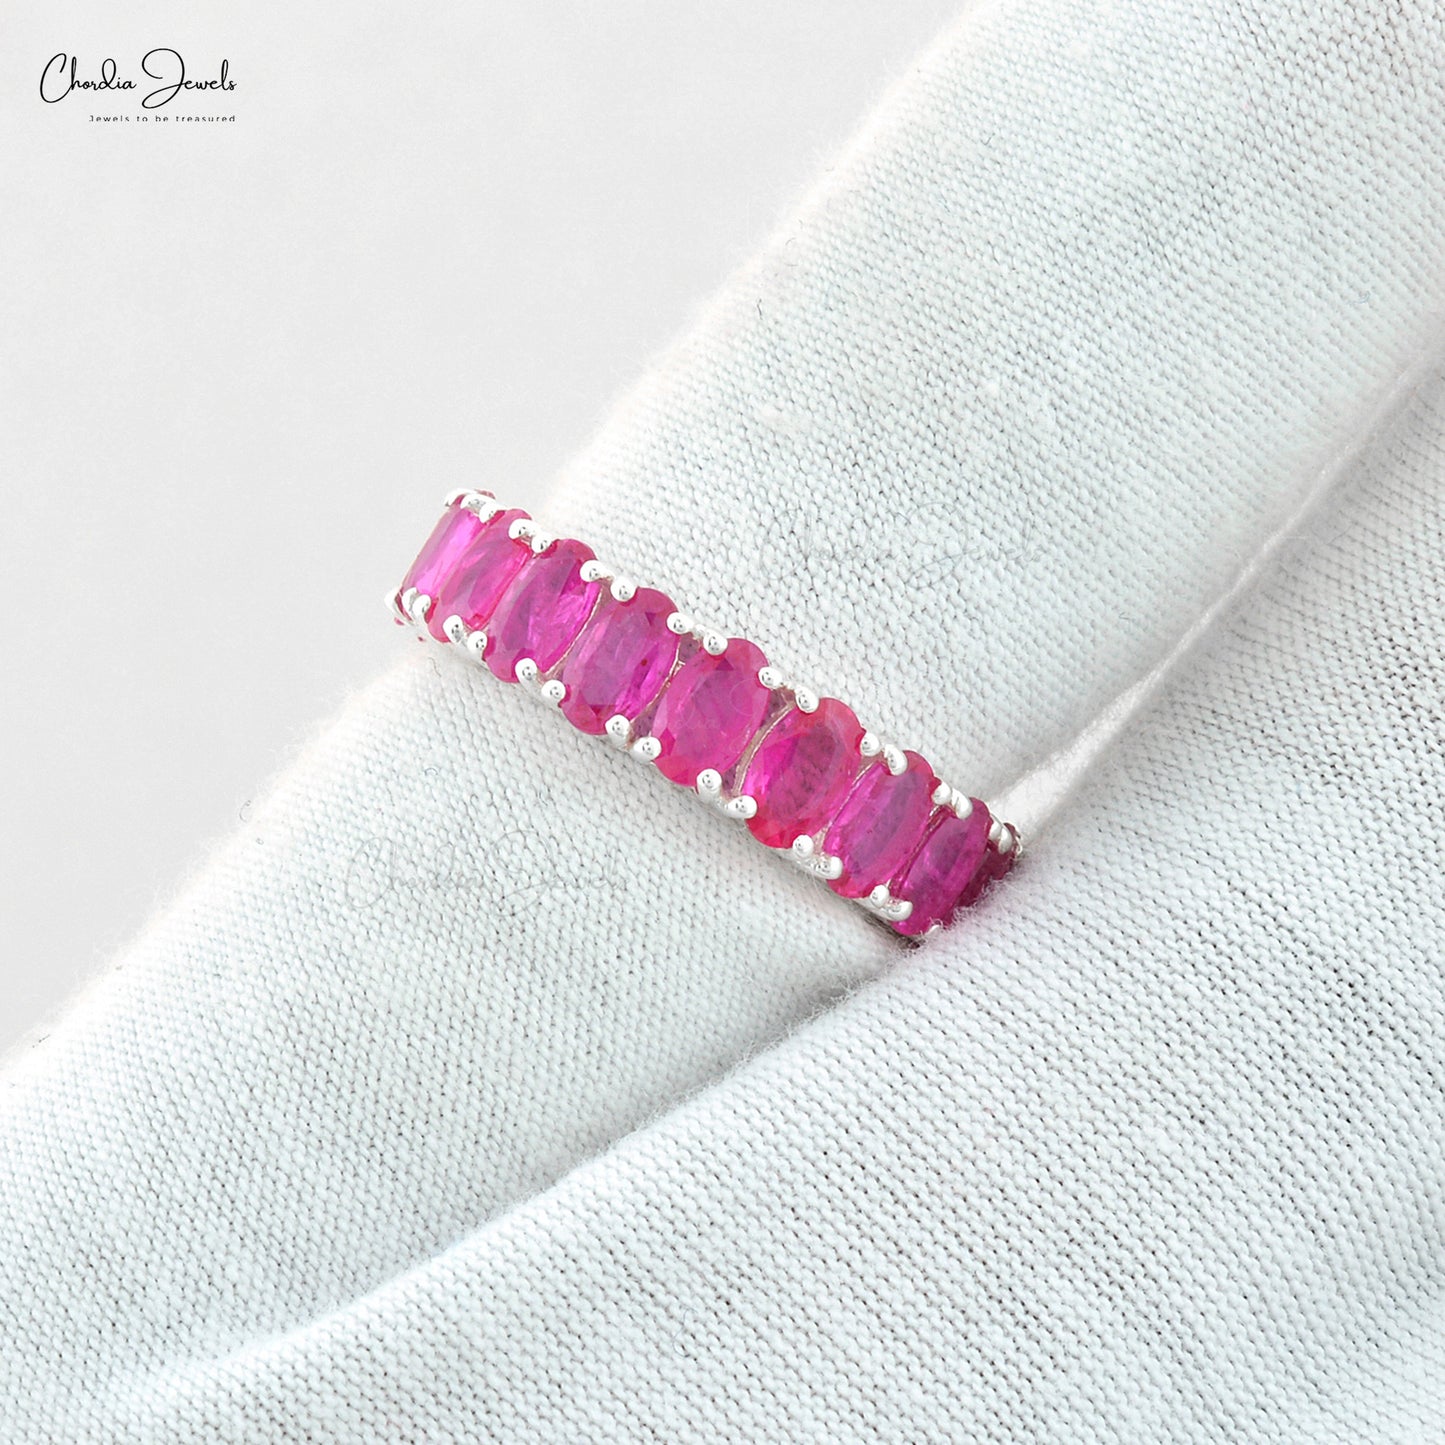 4.2 Carats Natural Ruby Full Eternity Band Ring, Sharing Prong Set July Birthstone Gemstone Band Ring in 14k Solid White Gold